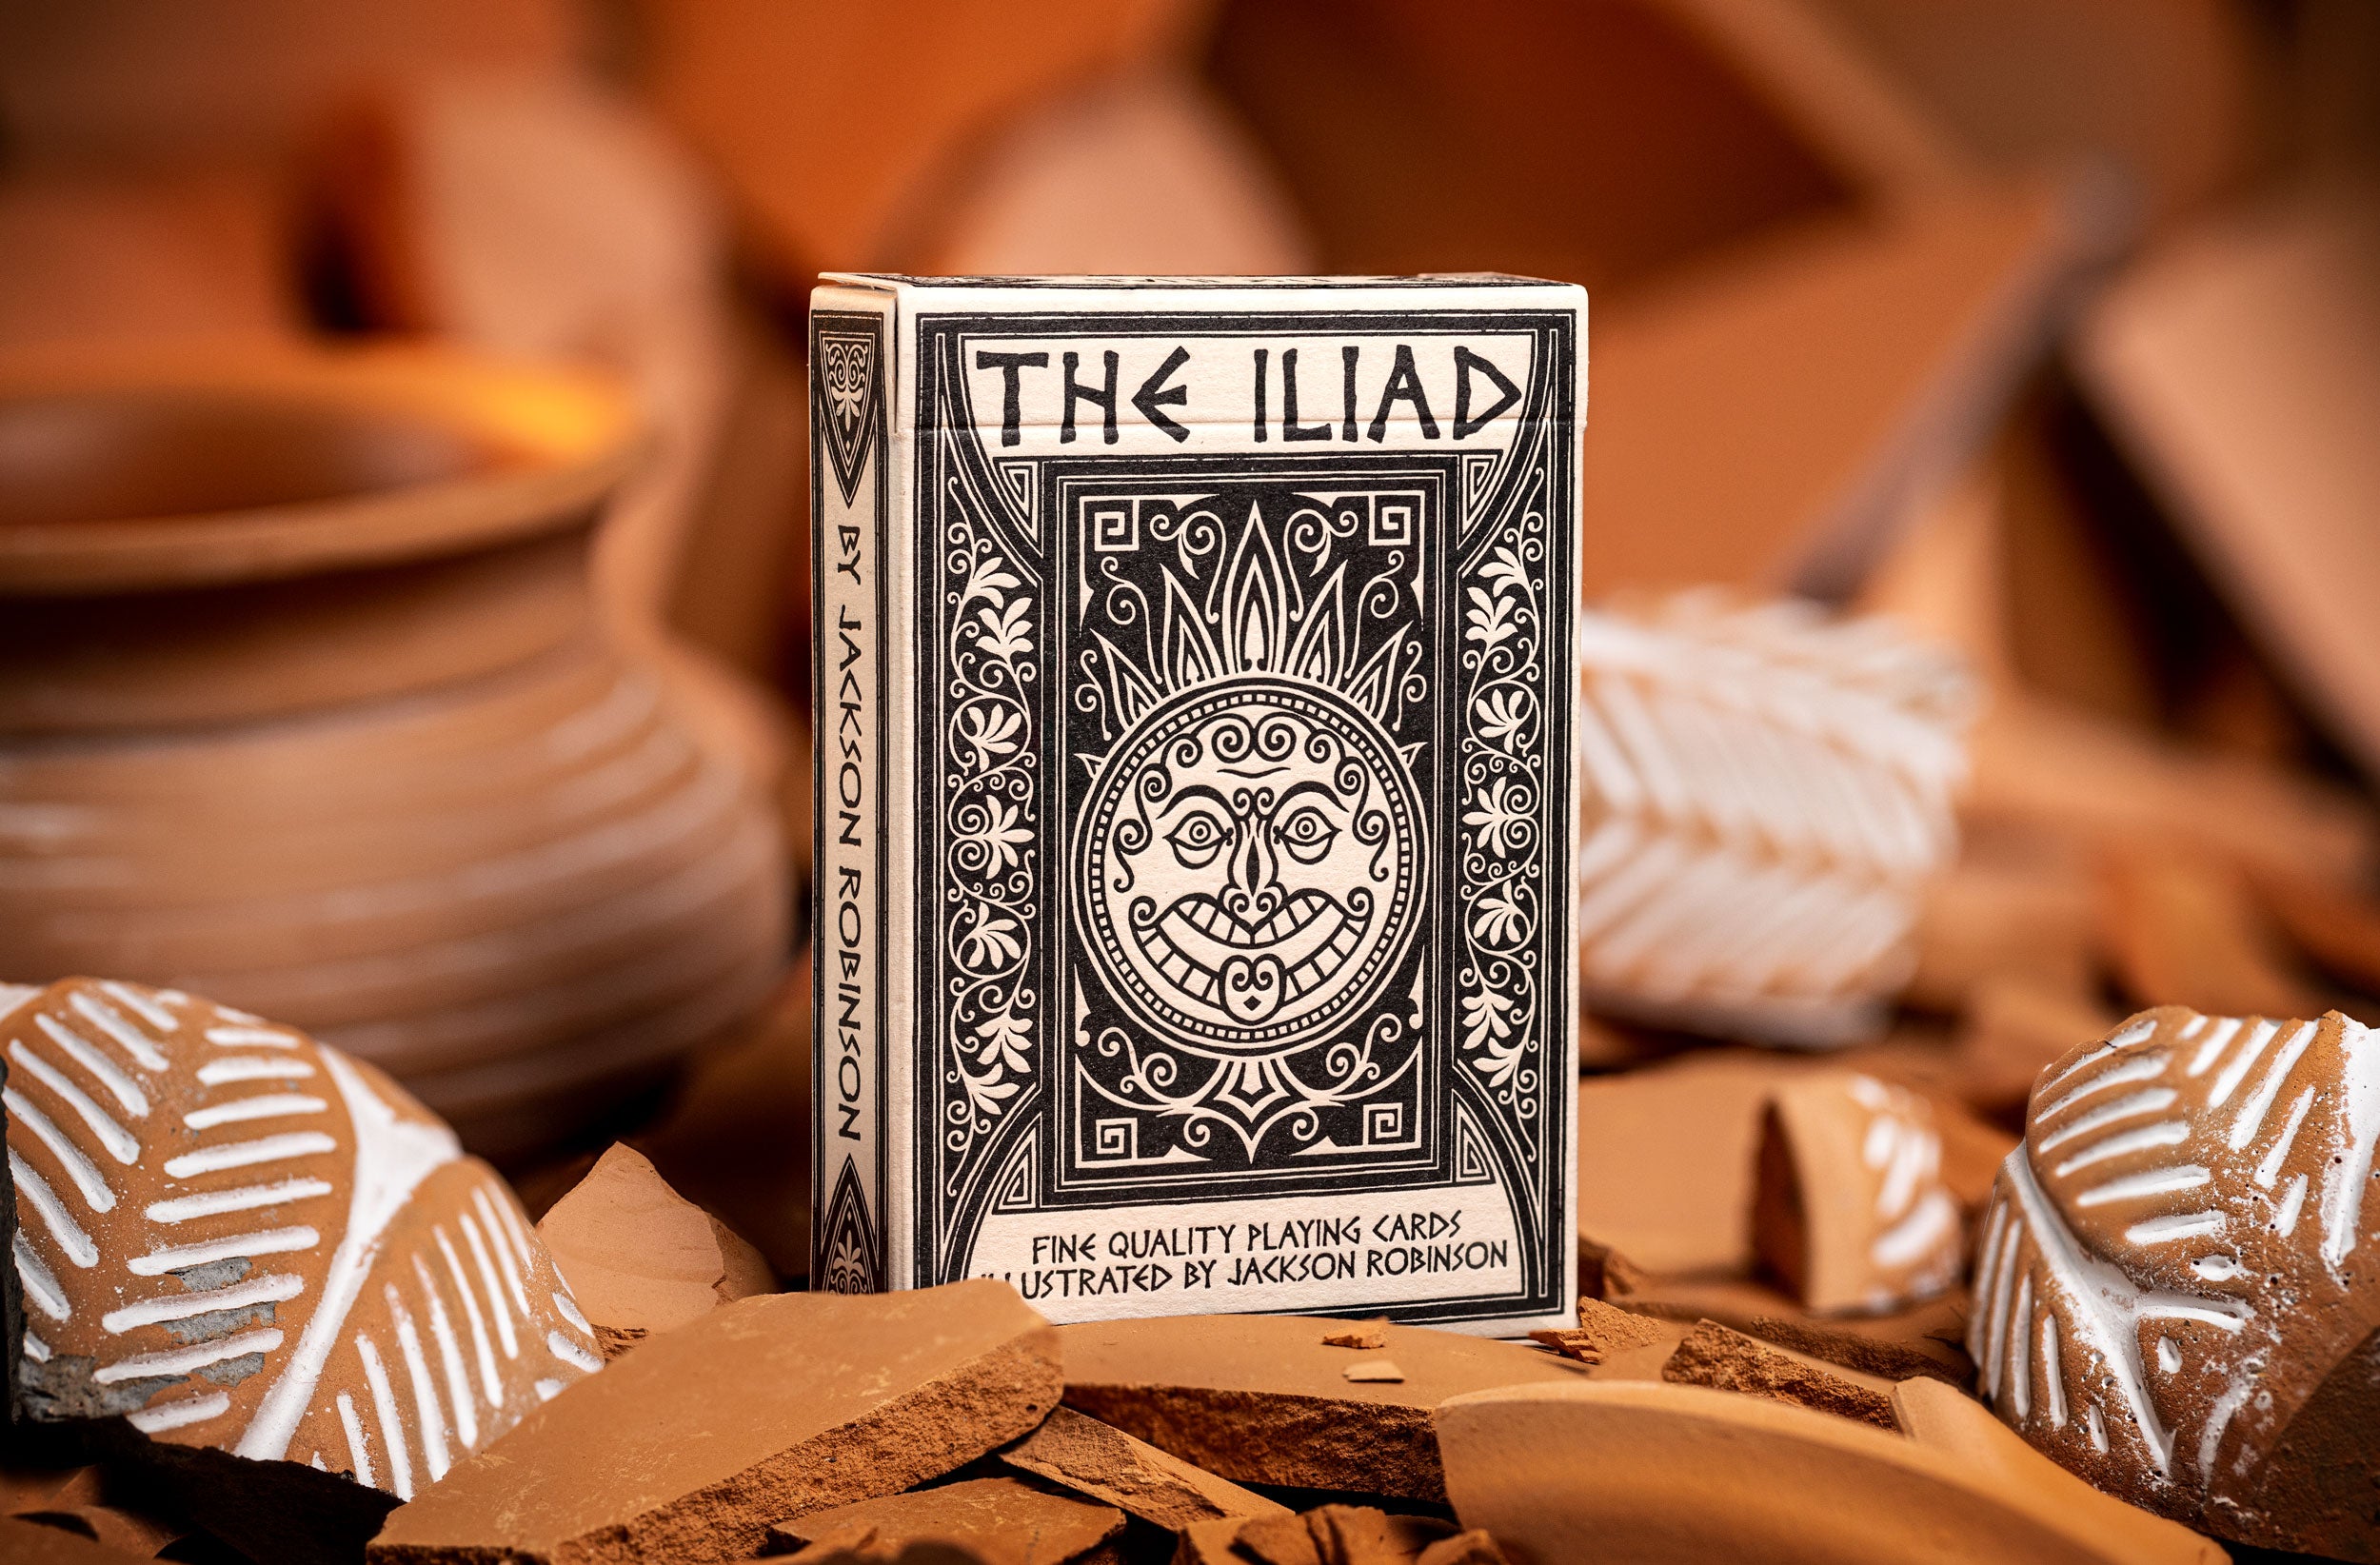 The Iliad Standard Edition Luxury Playing Cards